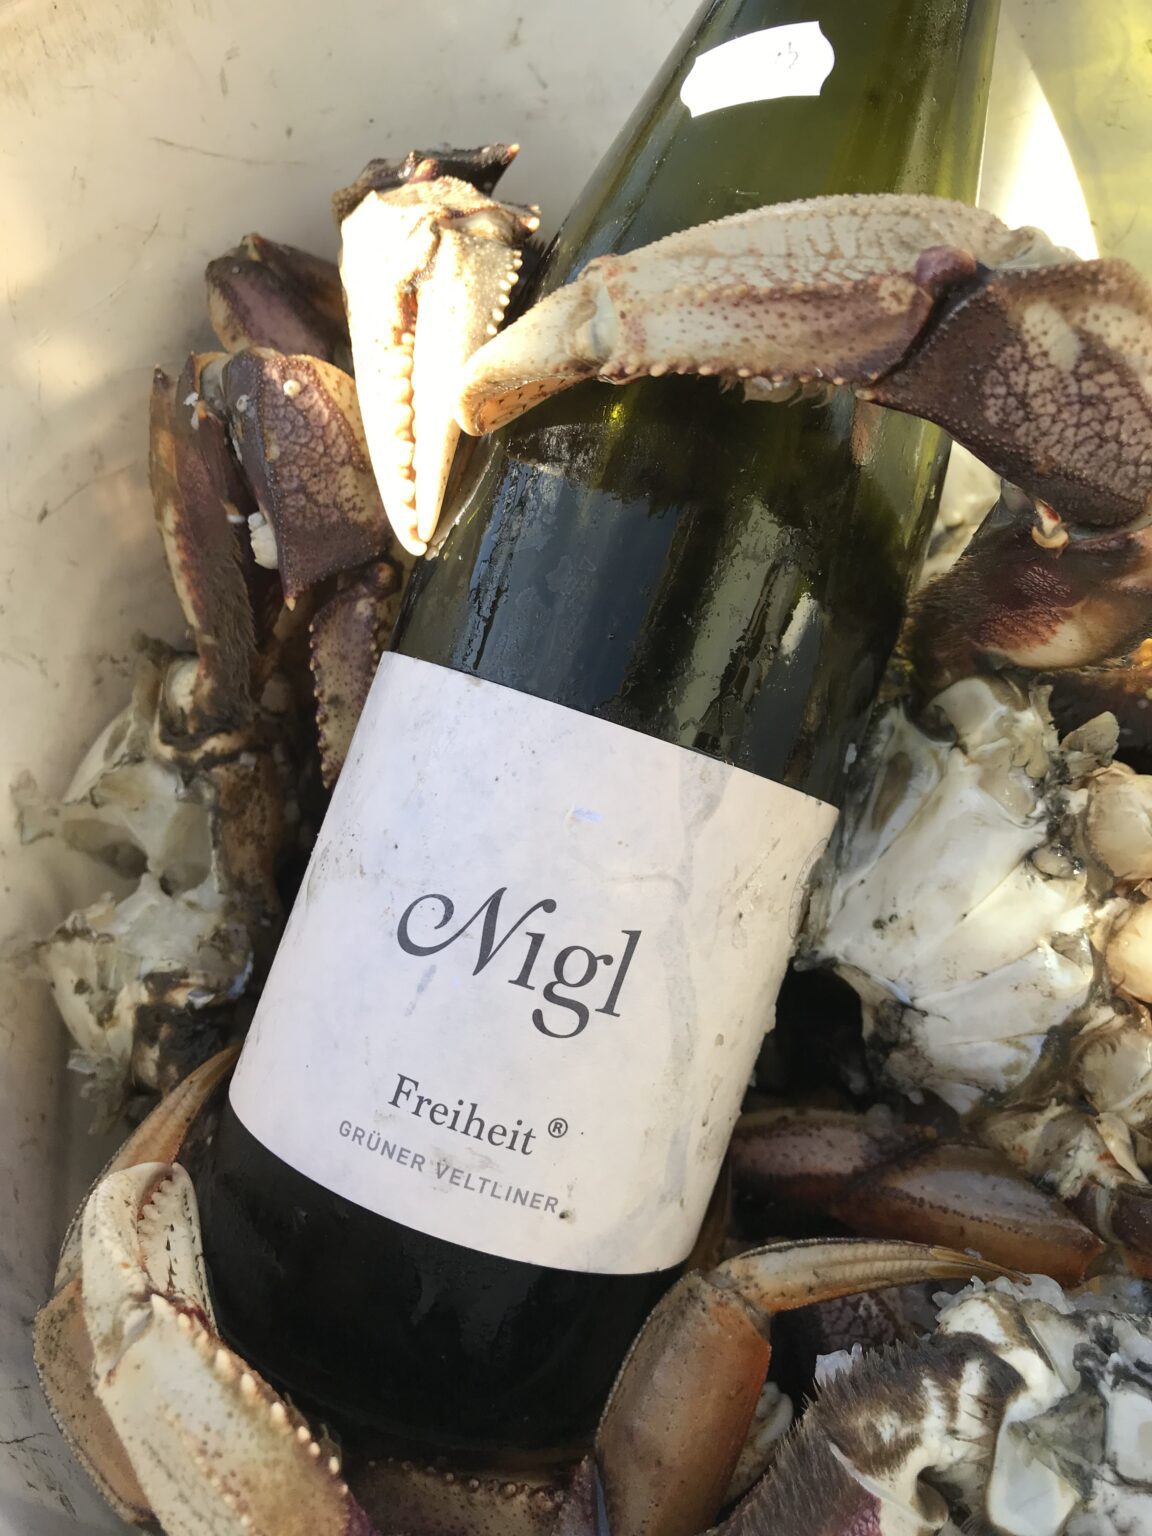 When attempting to pair wine with Dungeness crab